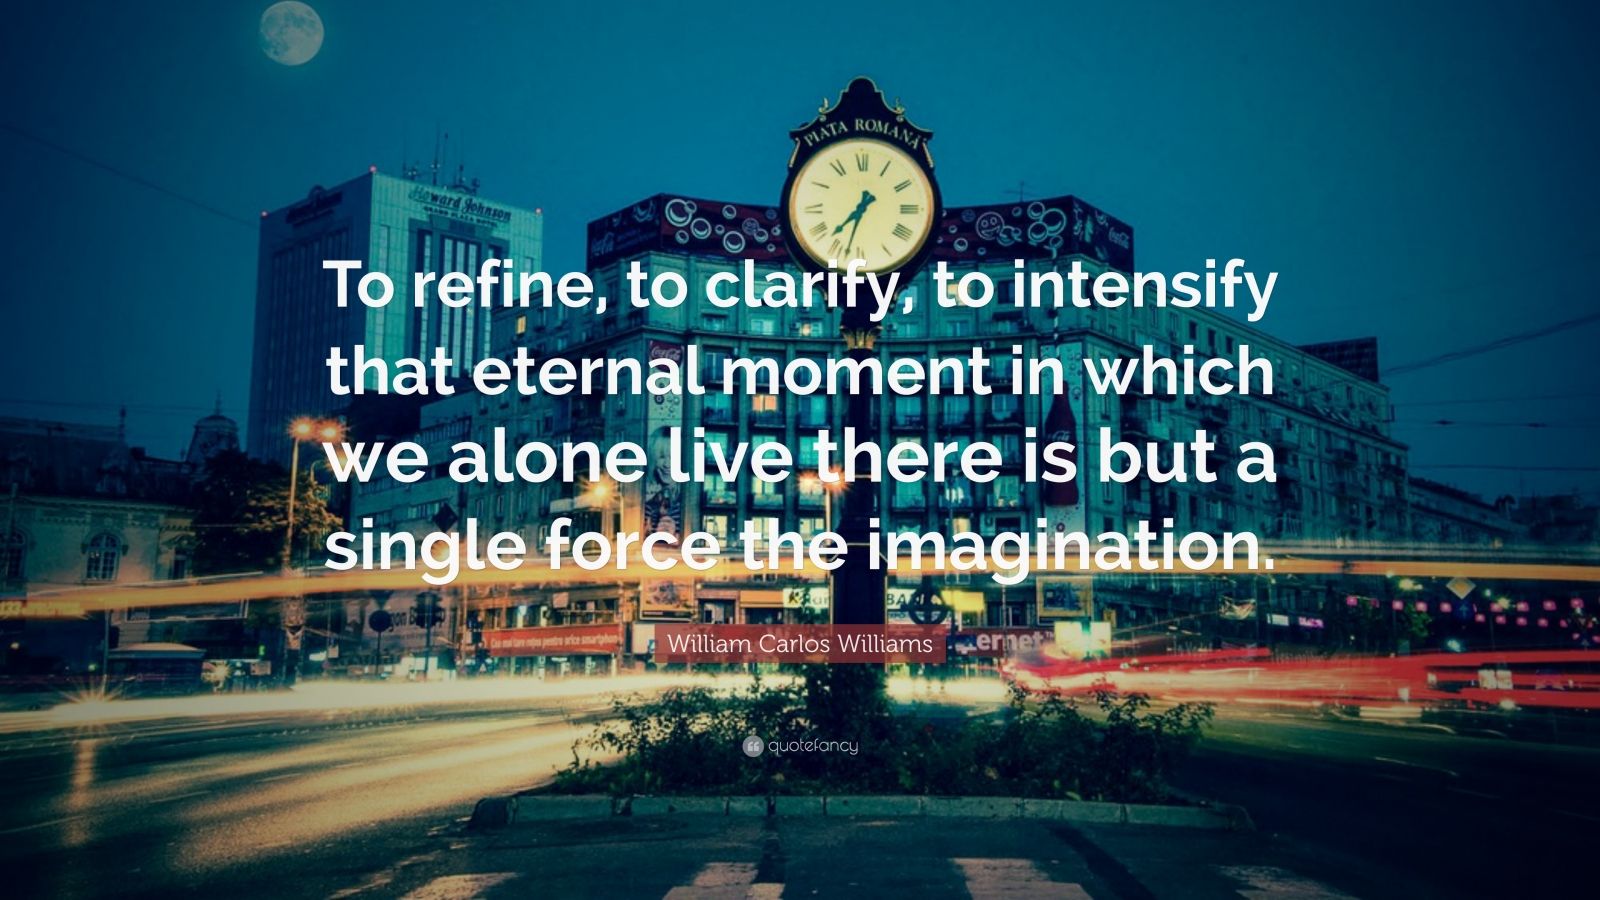 William Carlos Williams Quote: "To refine, to clarify, to intensify that eternal moment in which ...